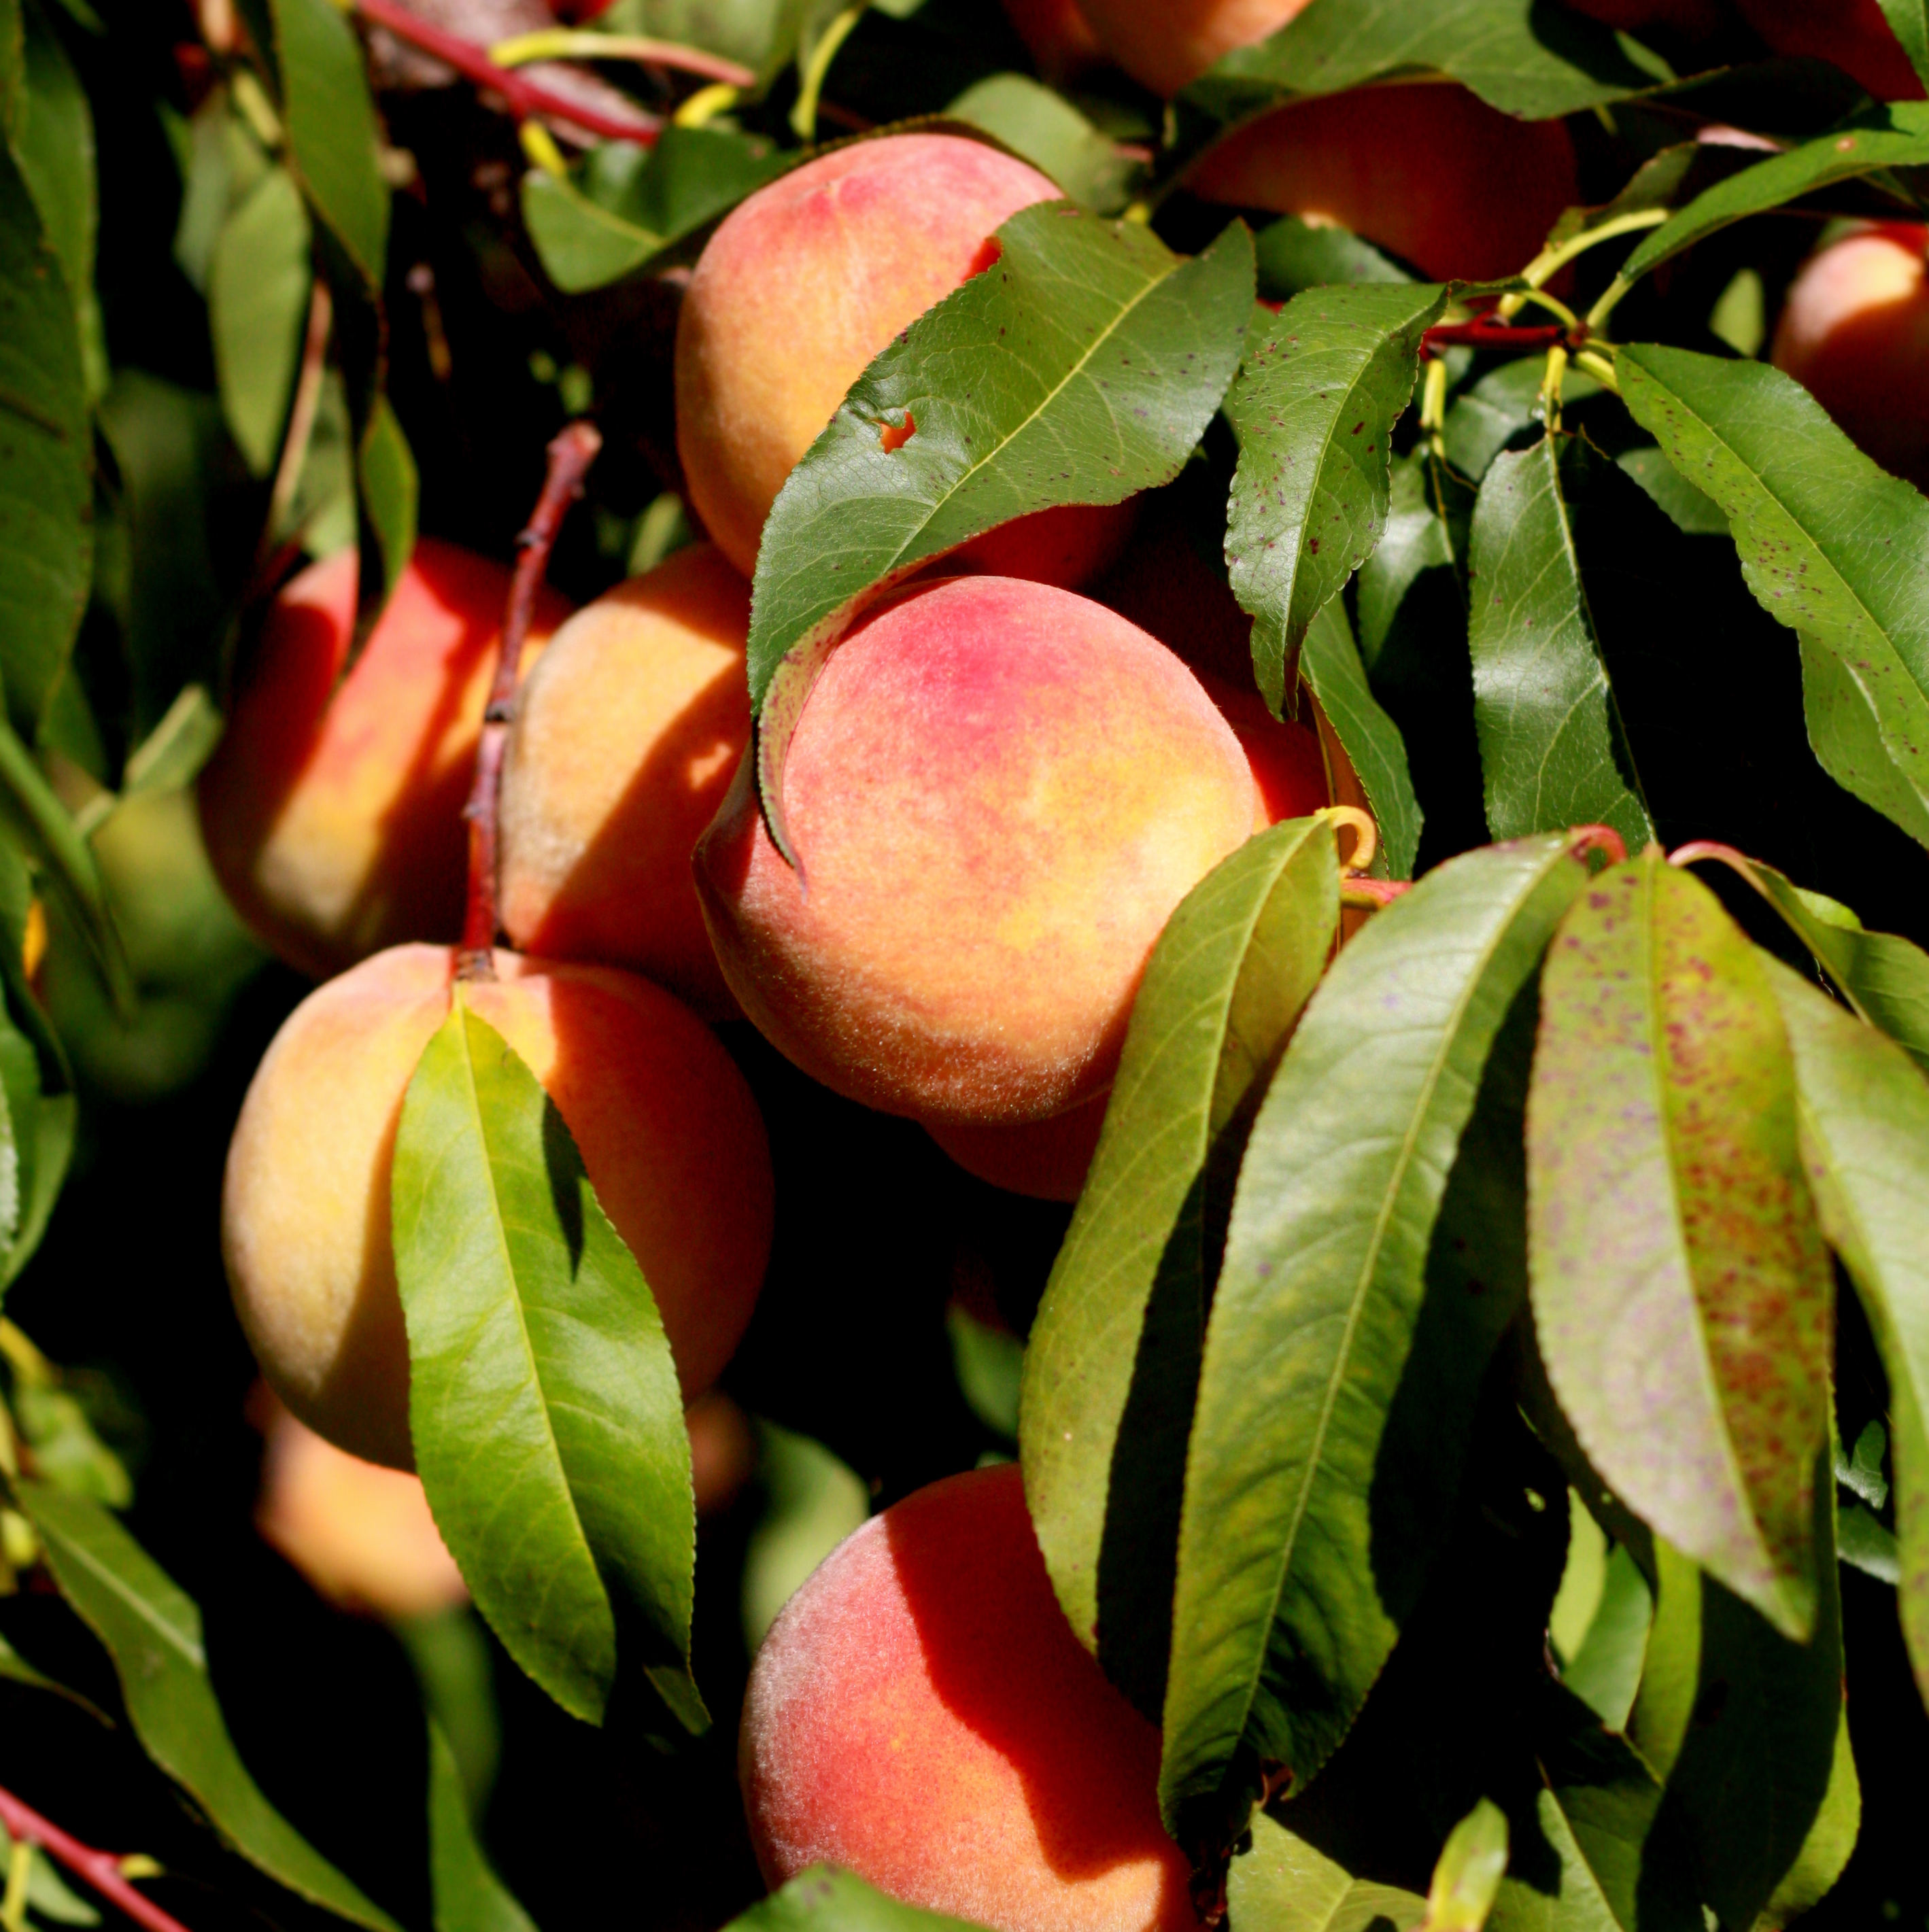 Pick Your Own peaches on the trees